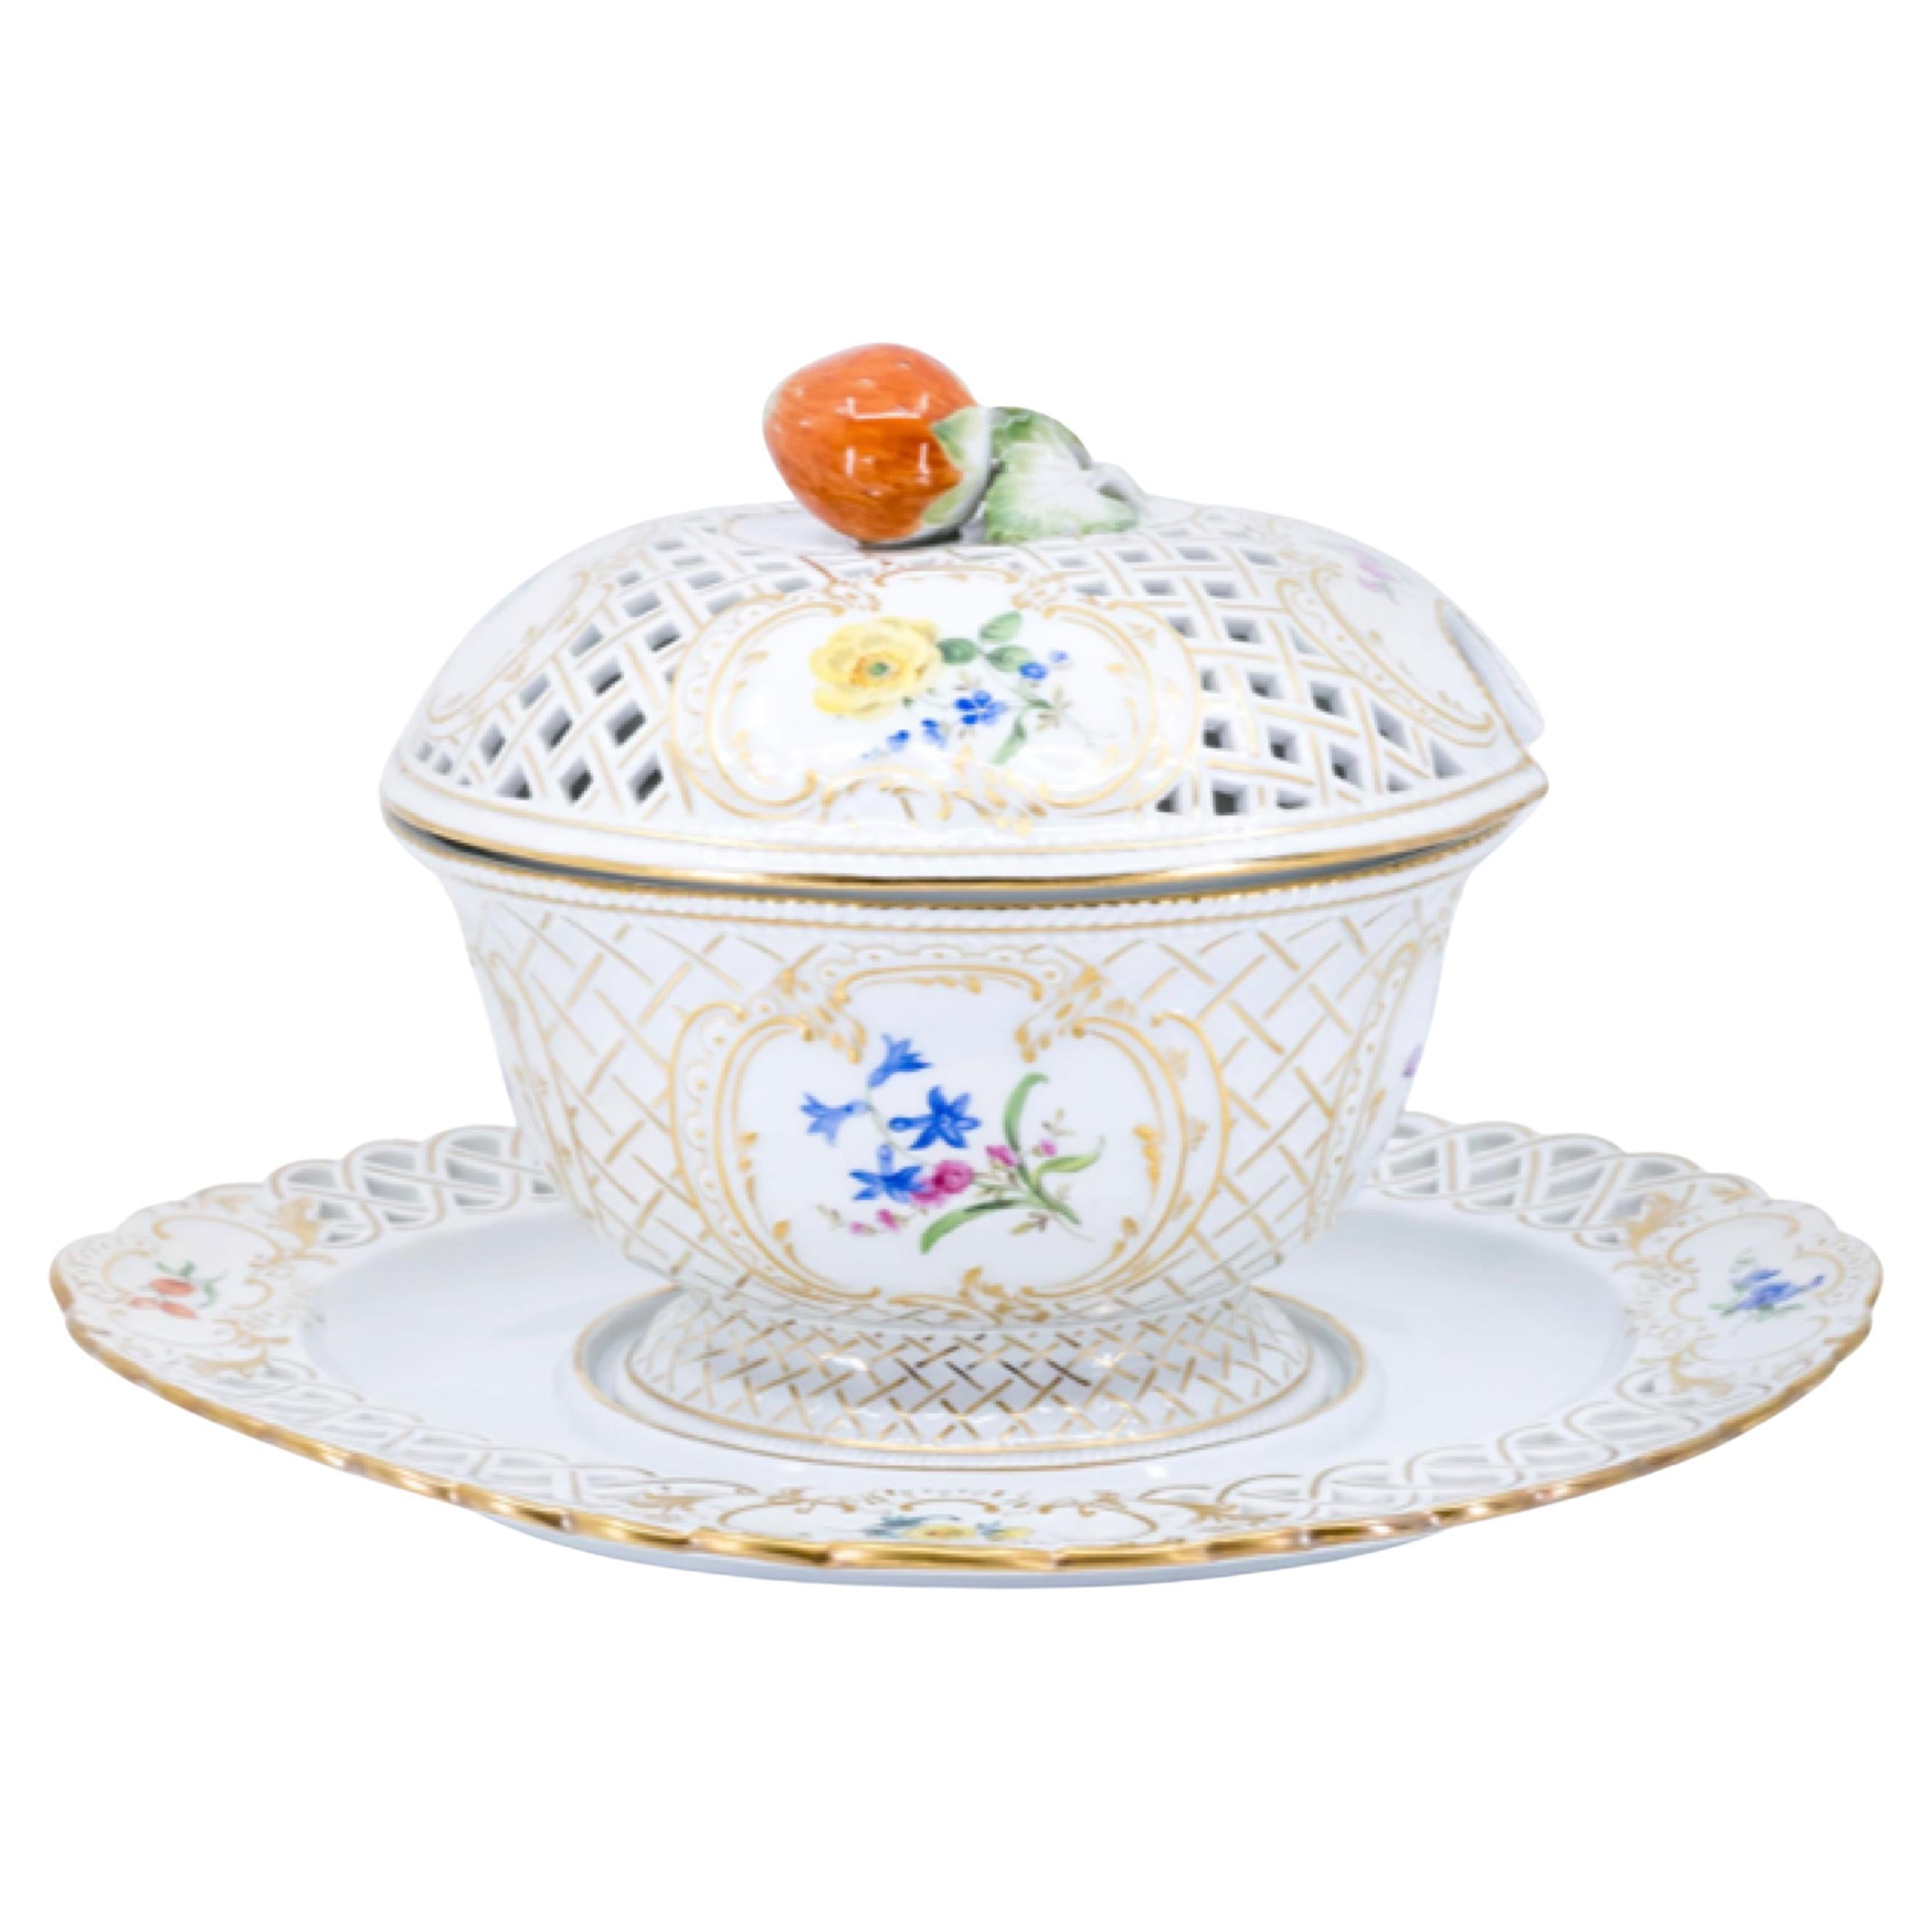 19th Century Meissen Porcelain Covered Bowl with Strawberry Finial For Sale